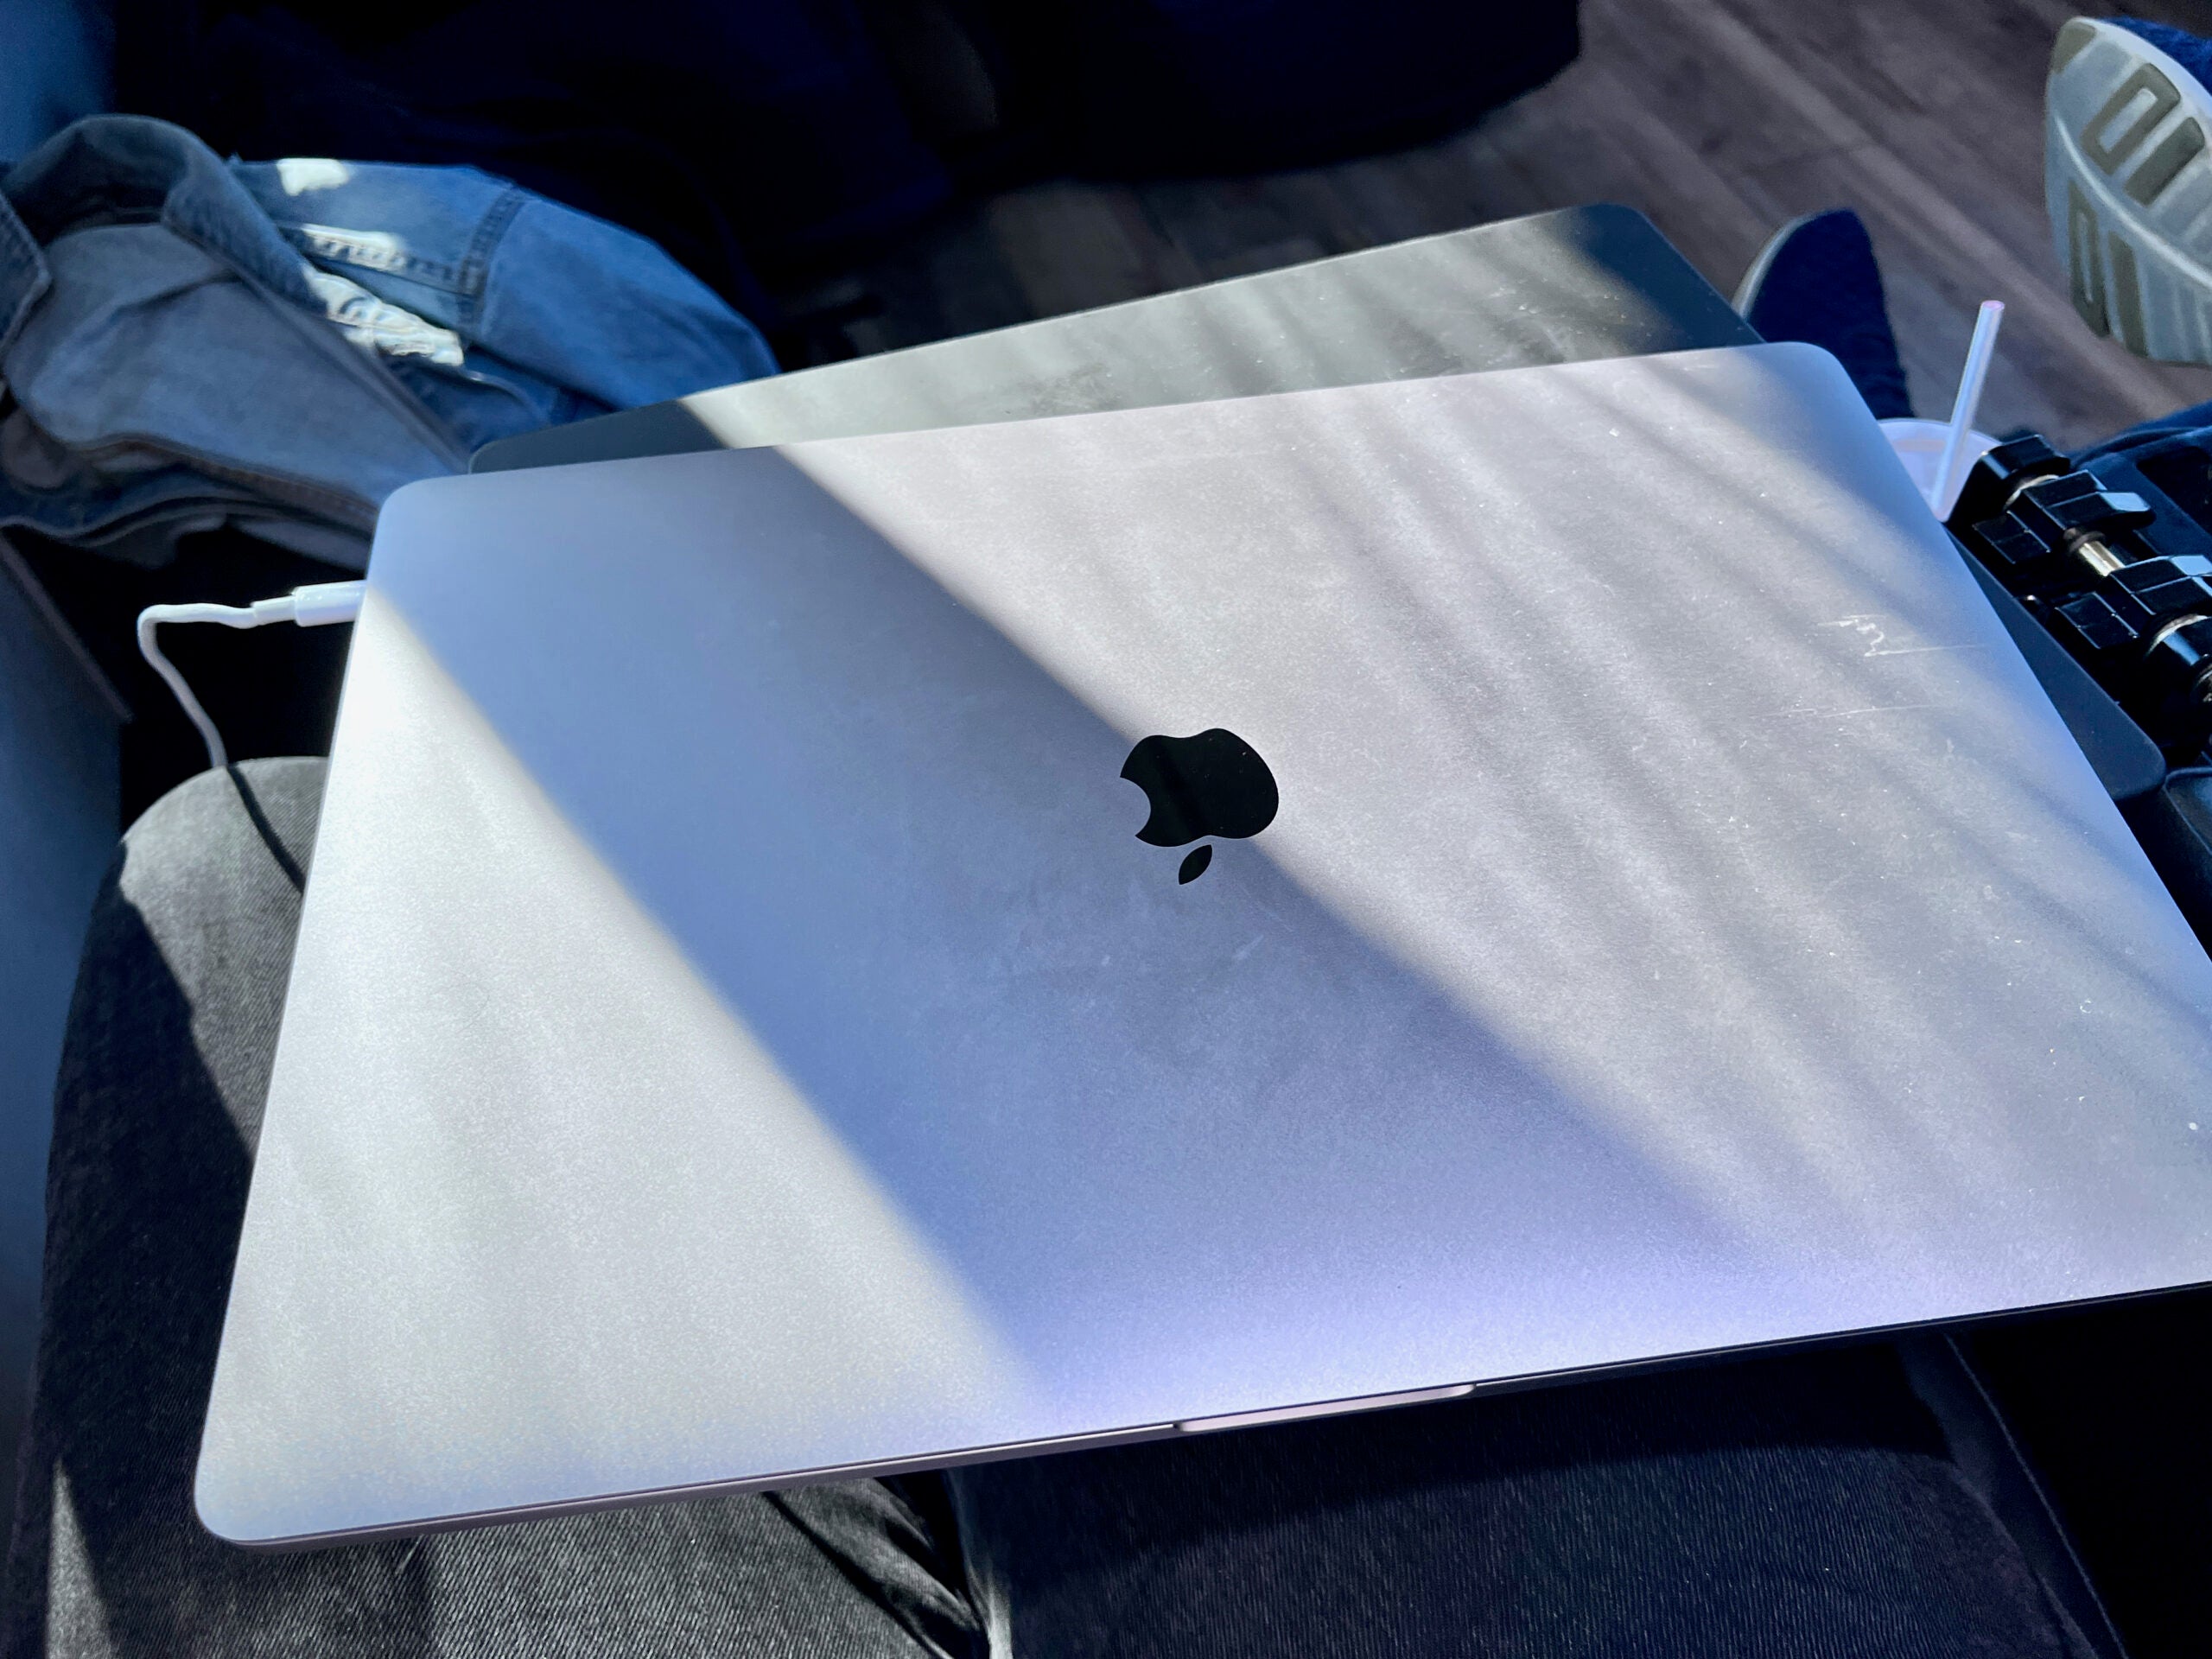 Closed MacBook Pro on bus table